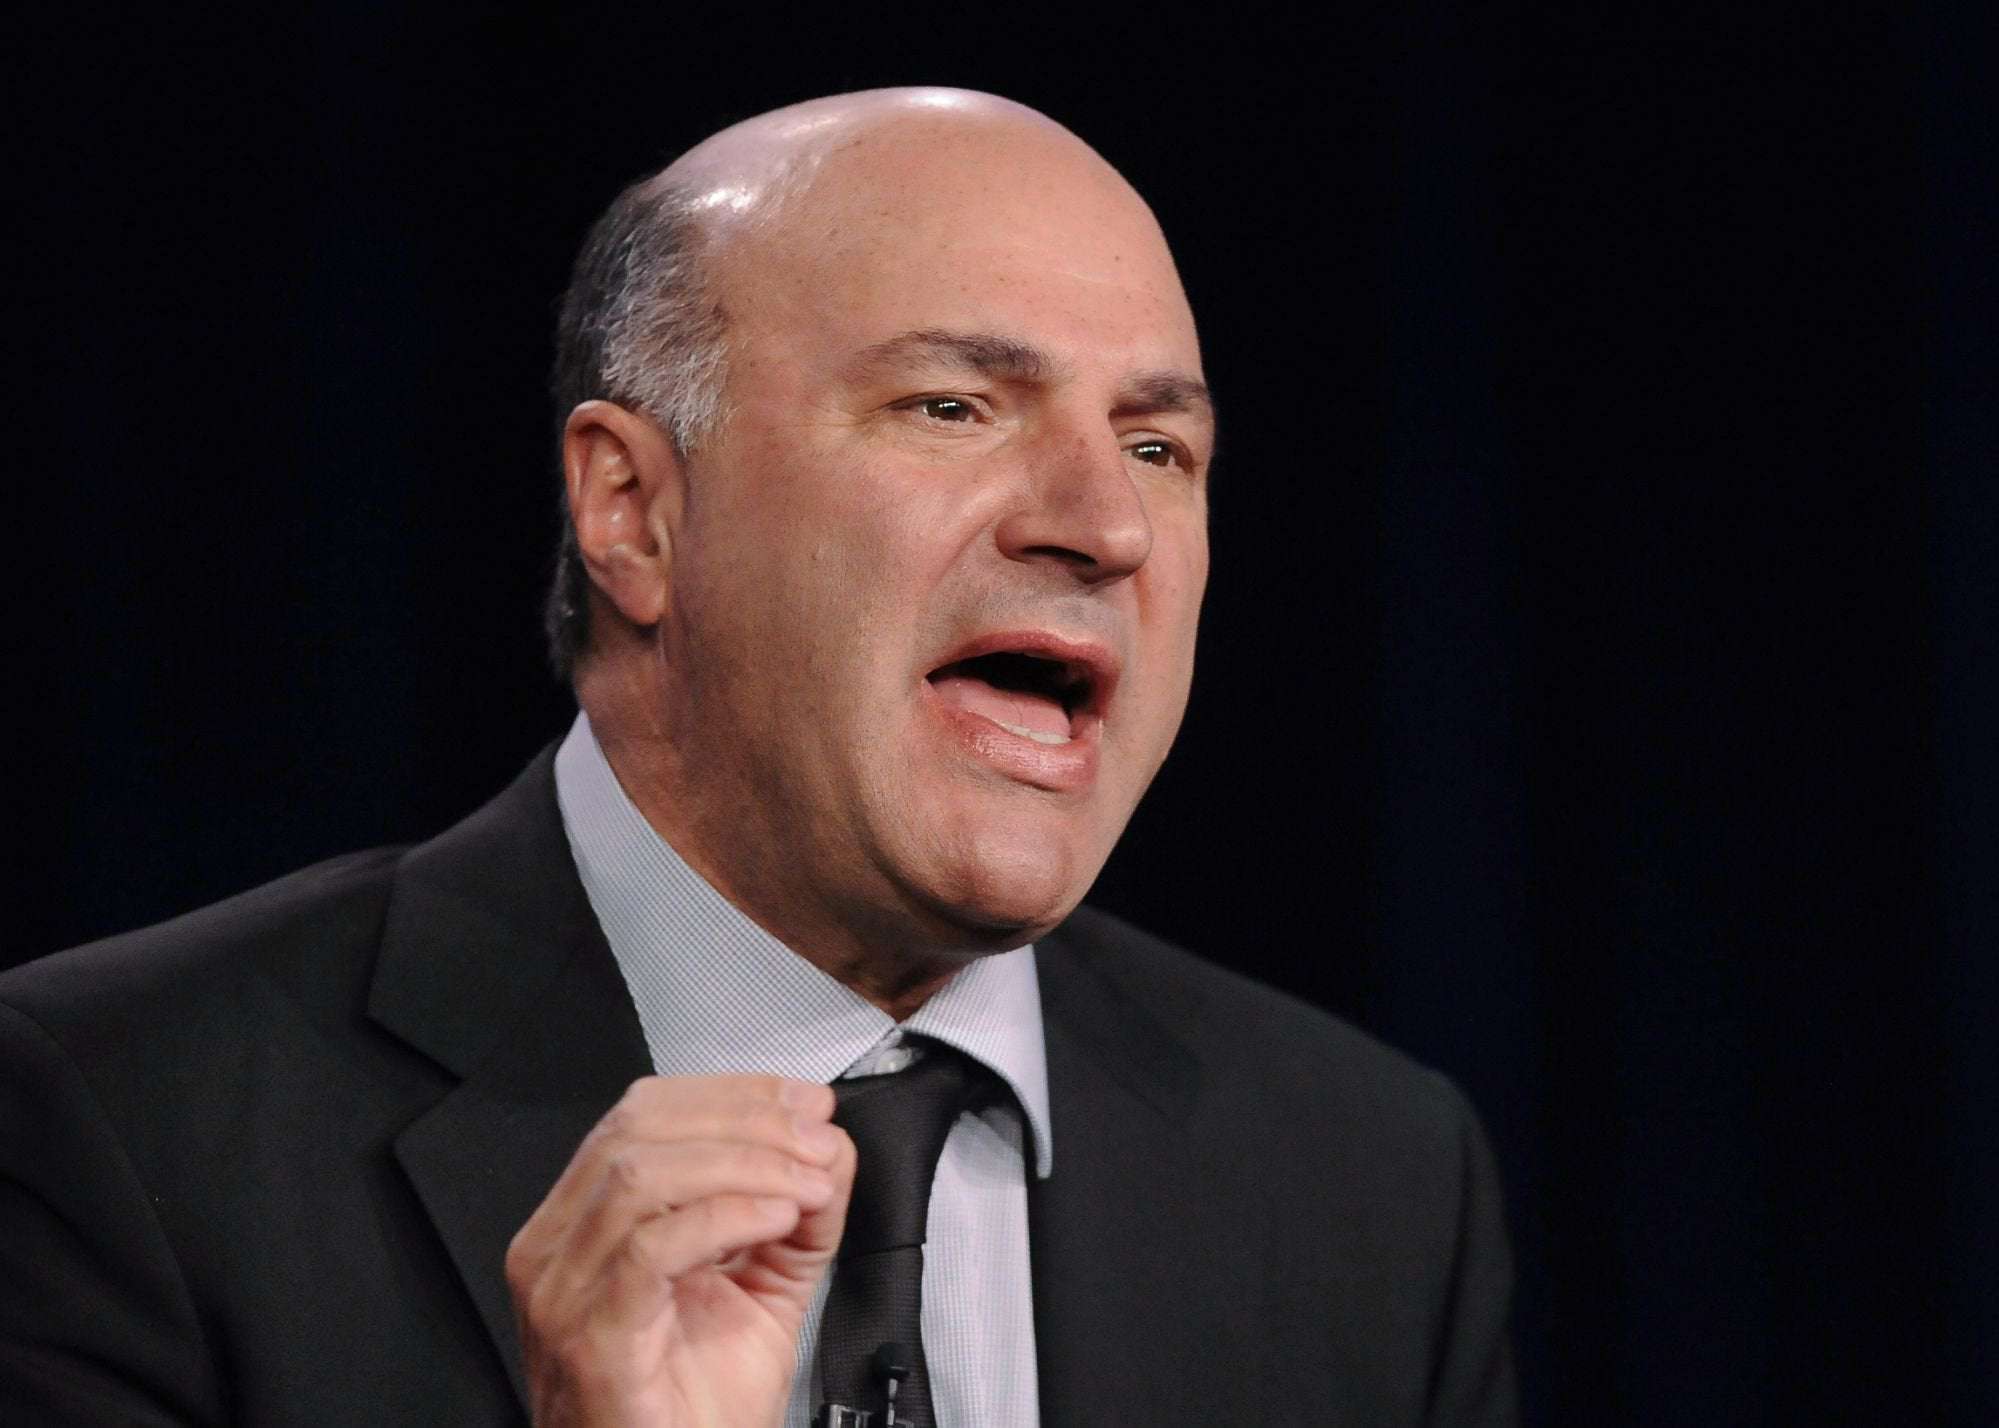 image for Shark Tank's Kevin O'Leary on COVID-19 stimulus: Give American people checks, 'stop funding companies'